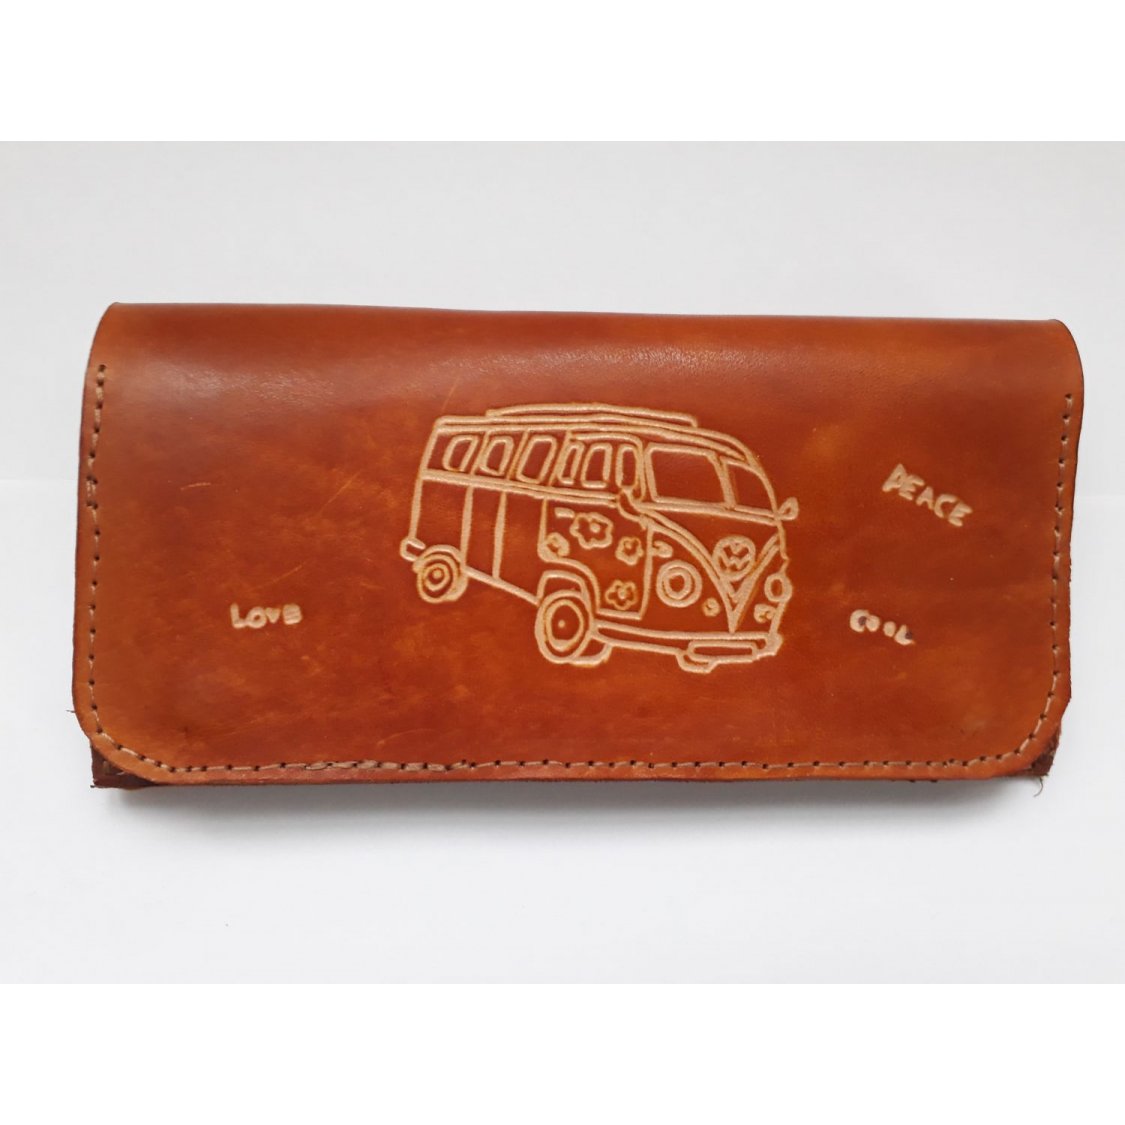 Personalized Tobacco Pouch